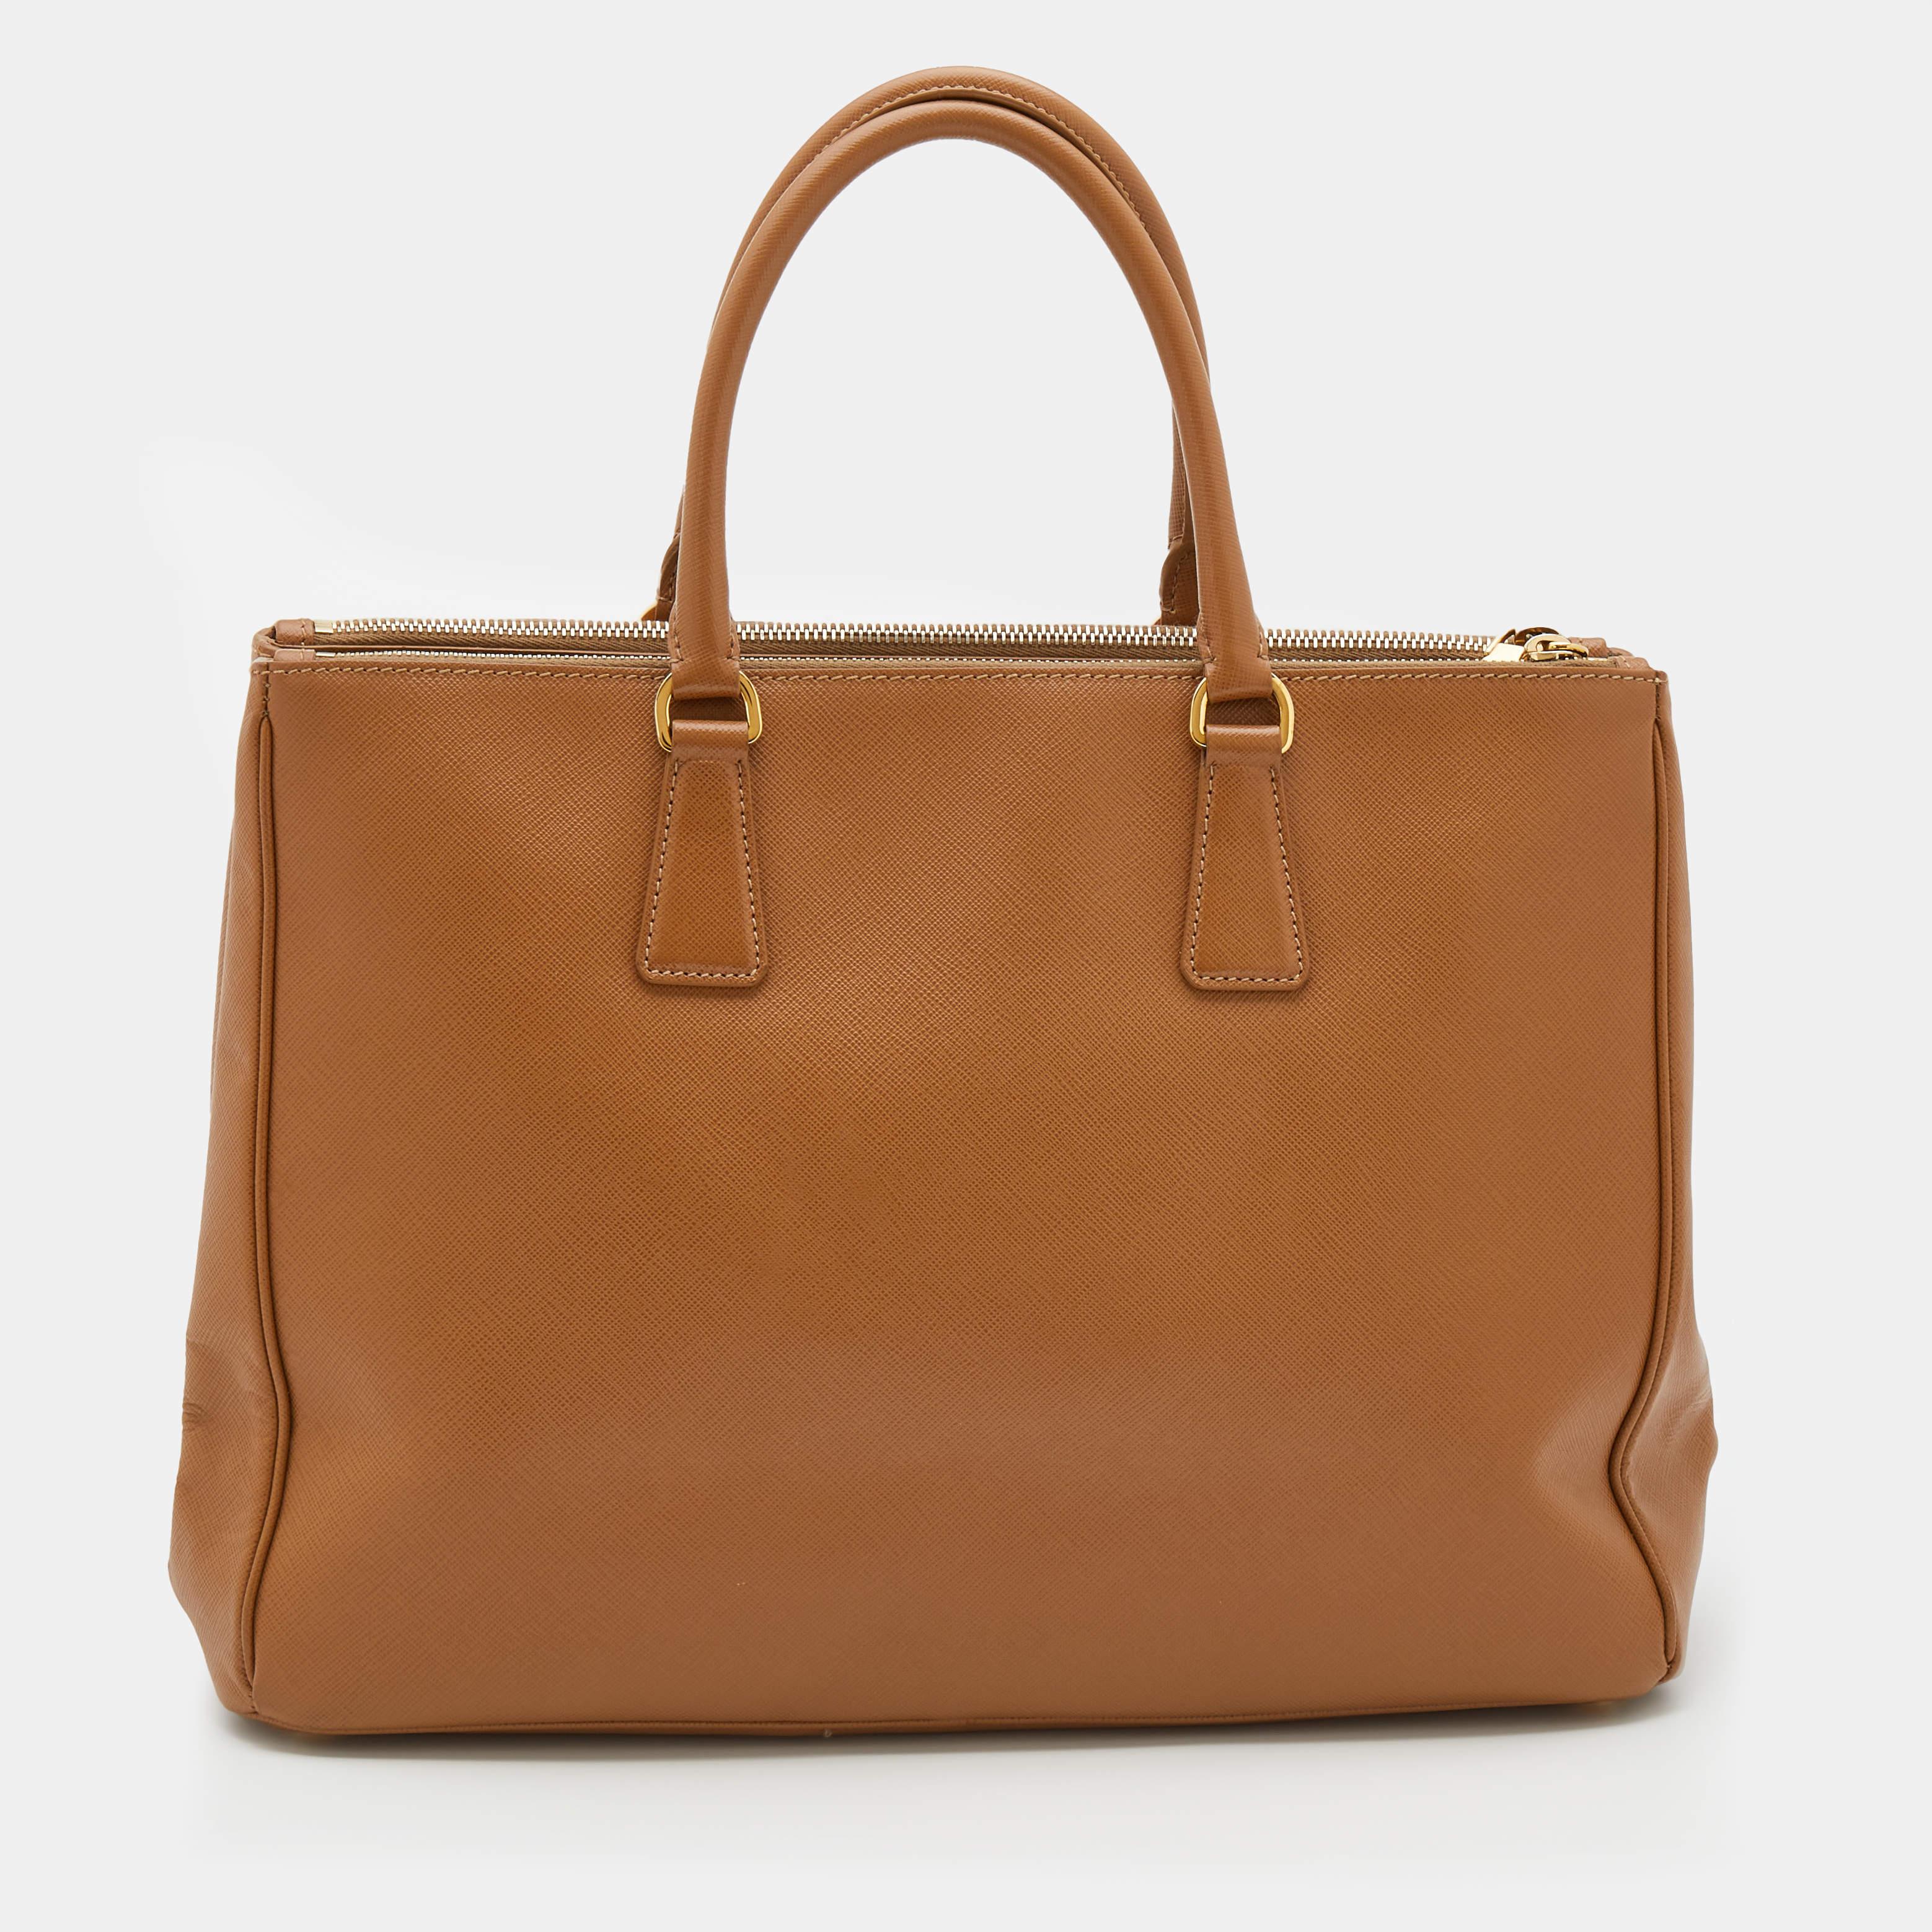 Feminine in shape and grand in design, this Double Zip tote by Prada will be a loved addition to your closet. It has been crafted from Saffiano Lux leather and styled minimally with gold-tone hardware. It comes with two top handles, two zip